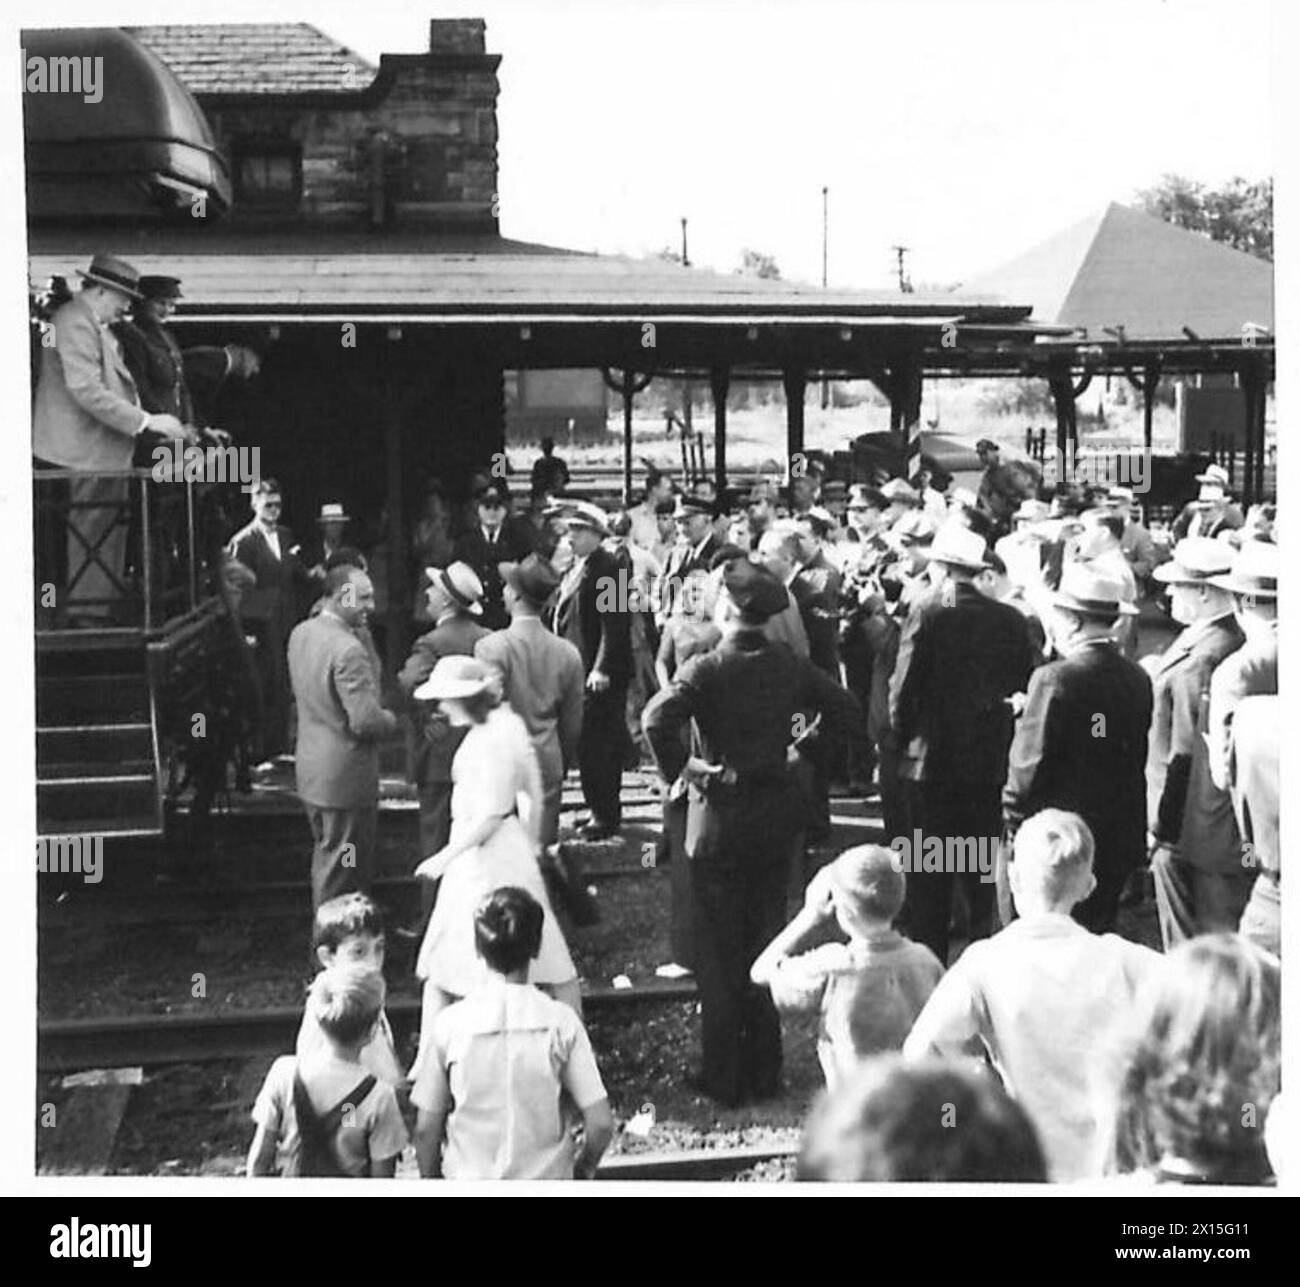 THE PRIME MINISTER AT NIAGARA FALLS - The Prime Minister and Miss Mary Churchill on the observation platform. A crowd gathered round his car before the train left British Army Stock Photo